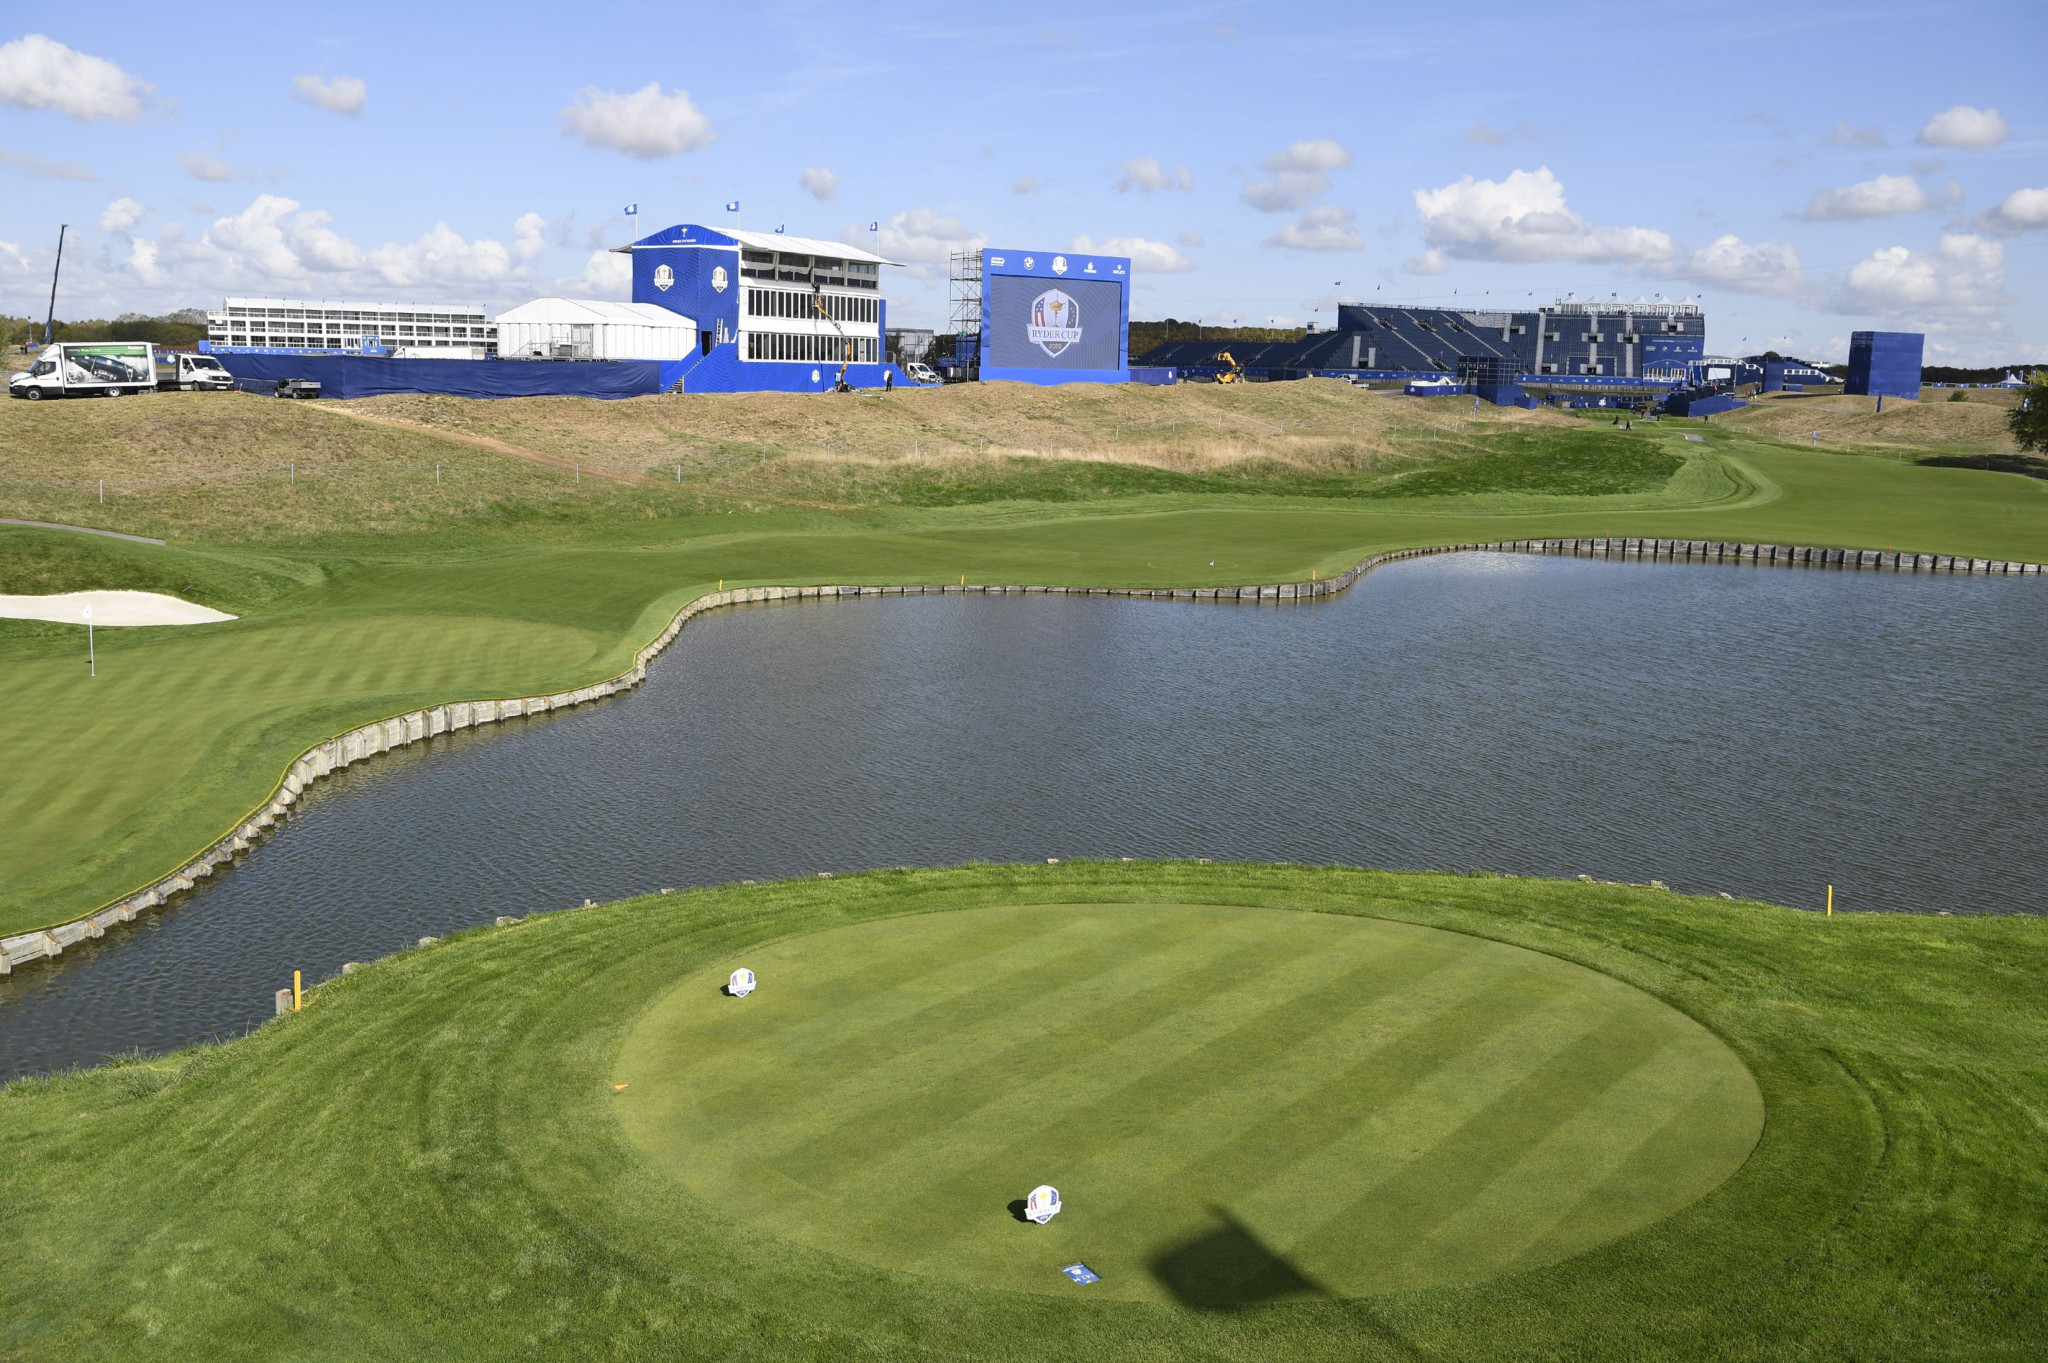 The Ryder Cup will take place at the Golf National de Saint-Quentin-en-Yvelines in Paris ©Getty Images